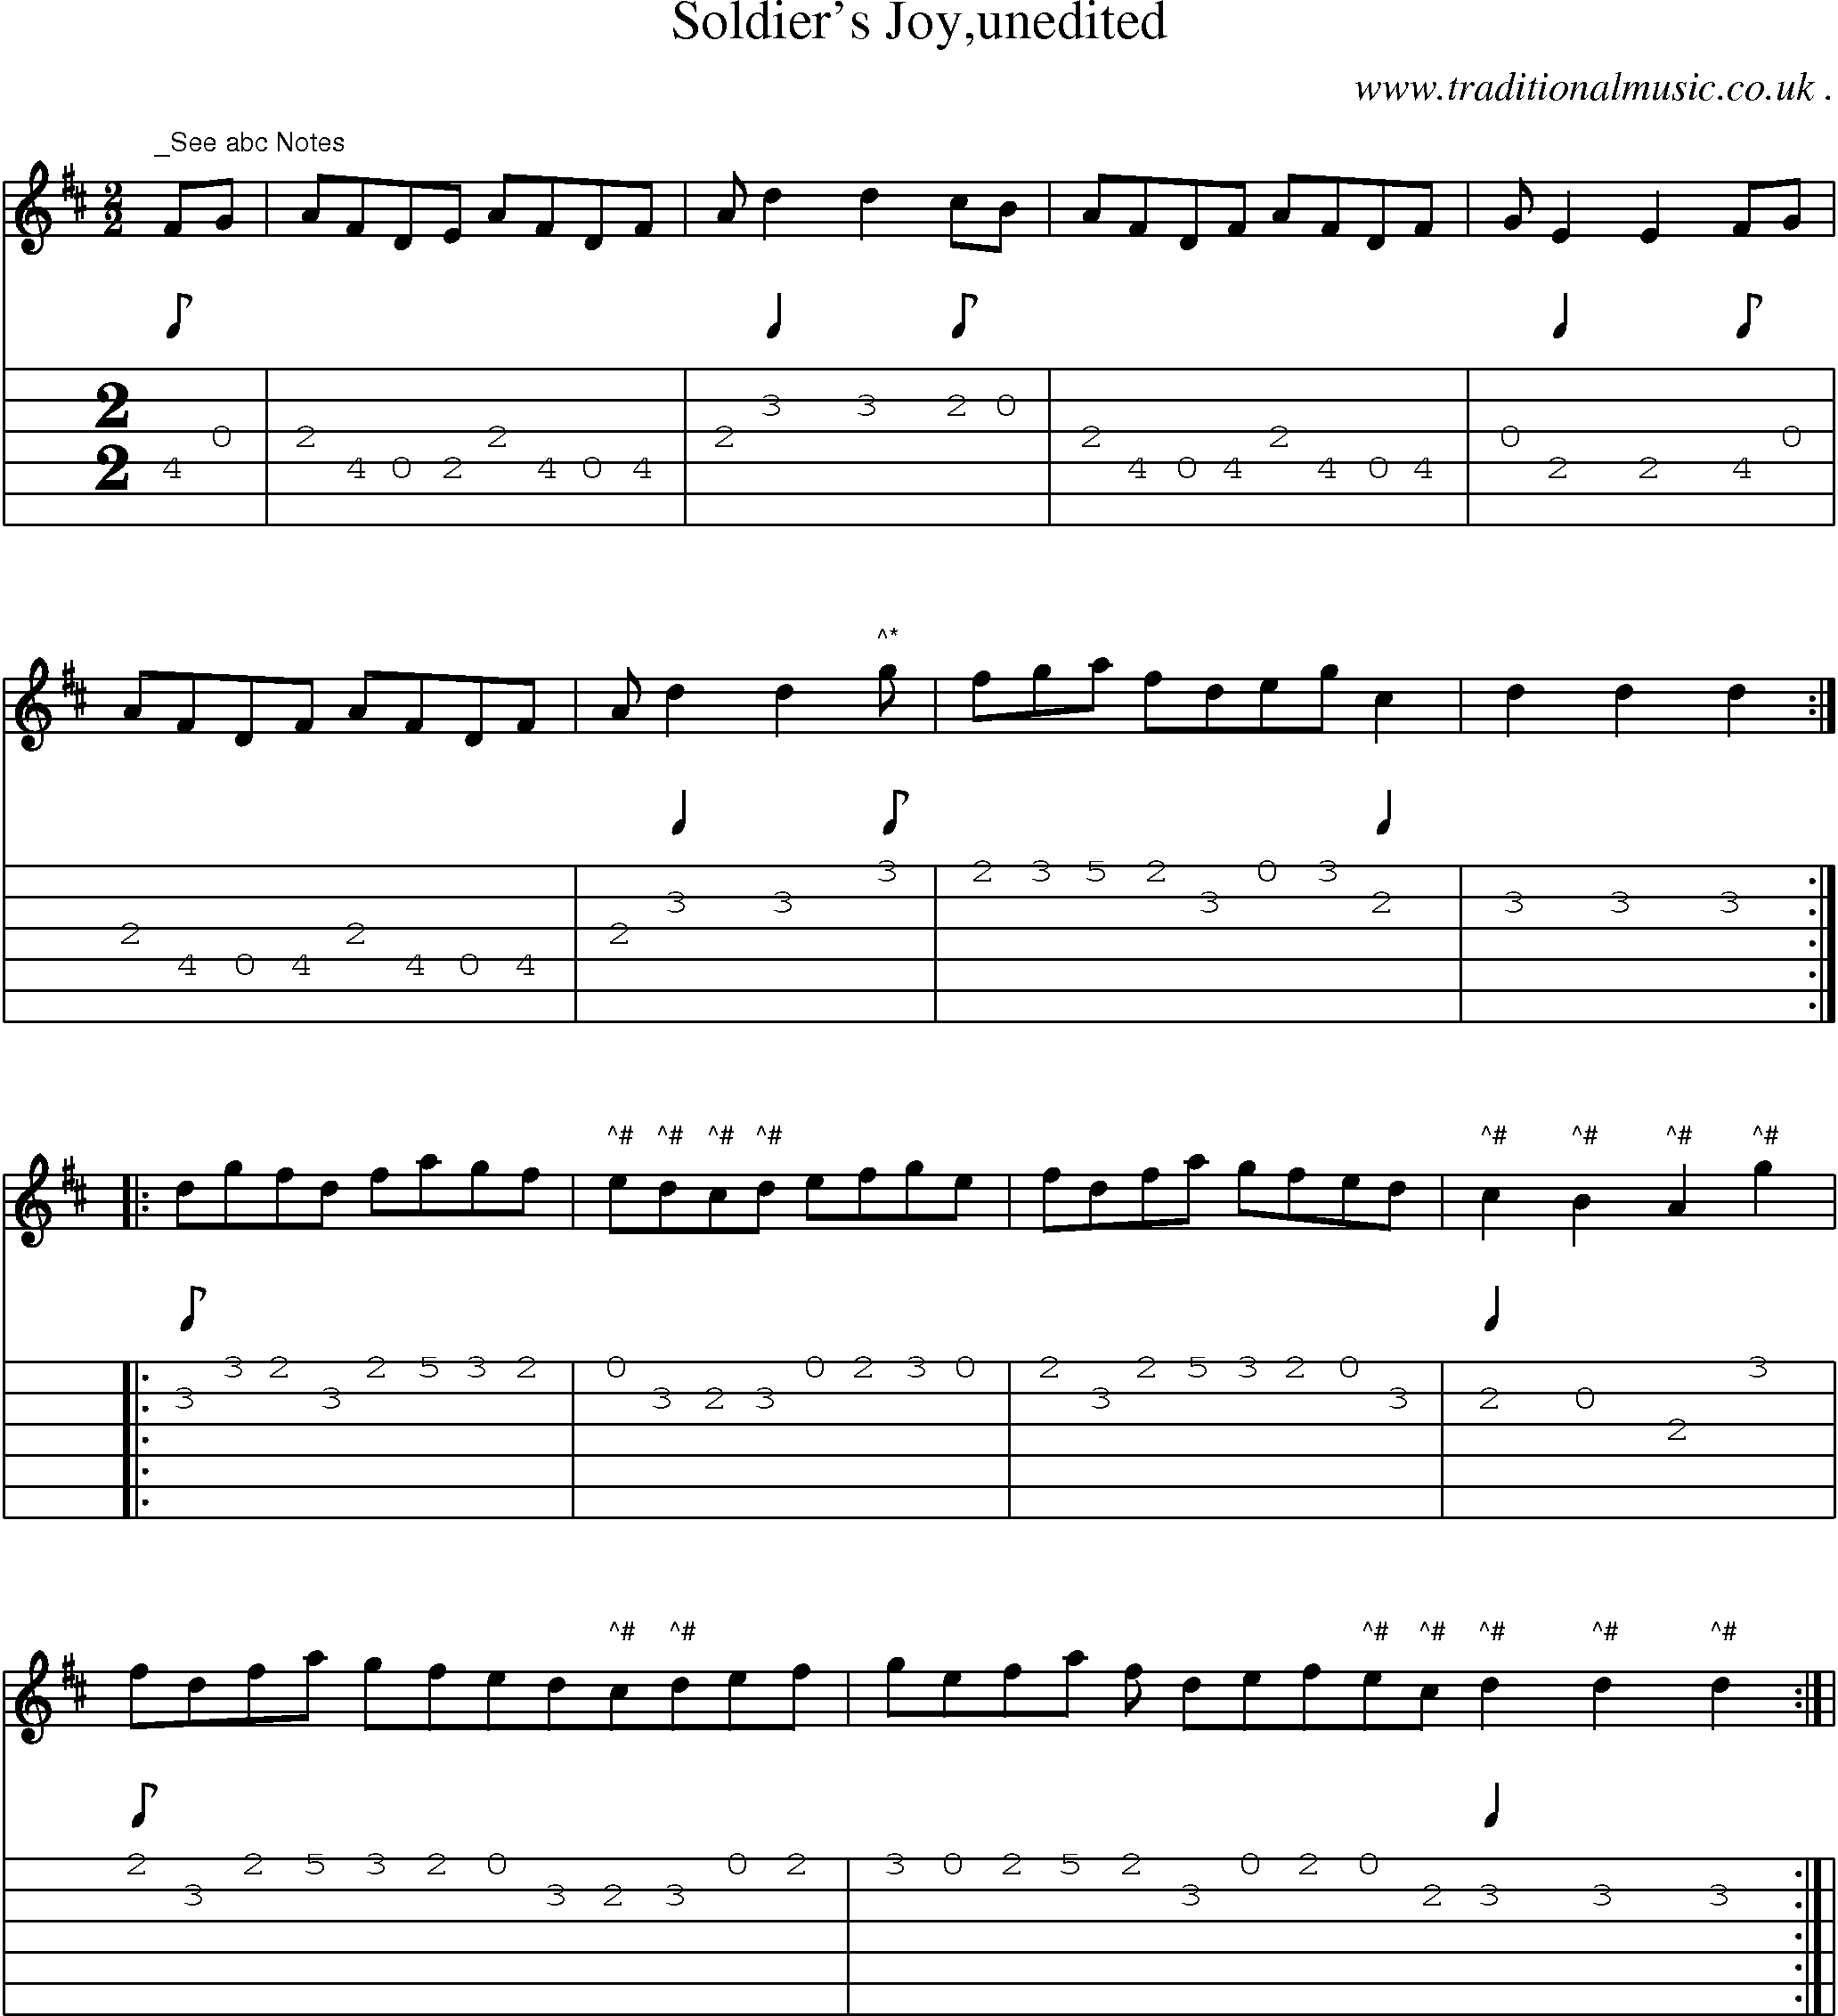 Sheet-Music and Guitar Tabs for Soldiers Joyunedited